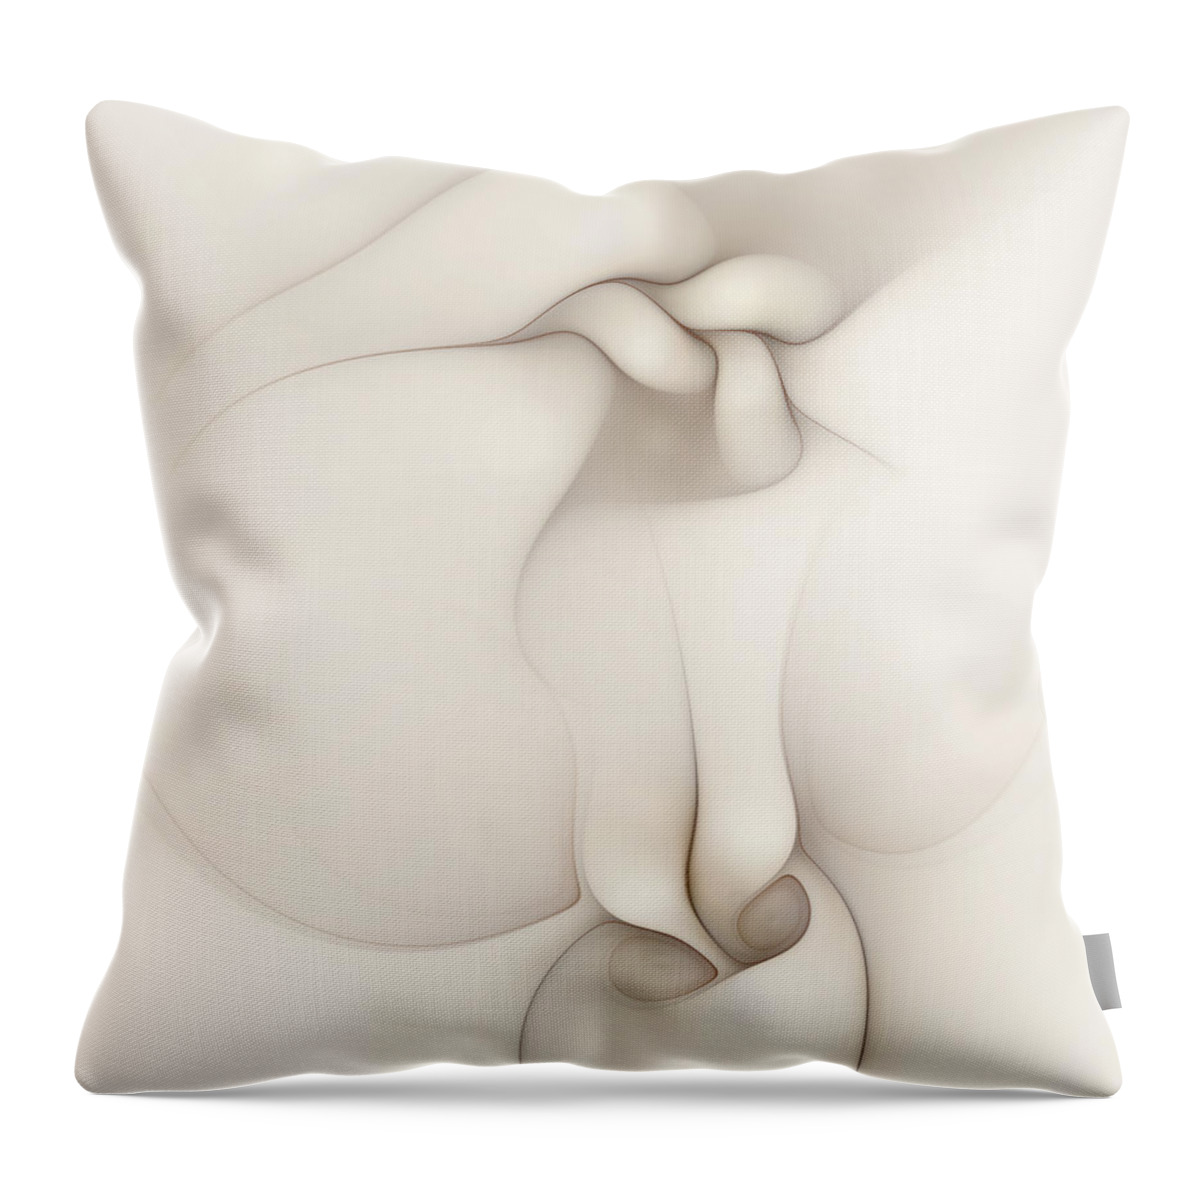 Abstract Throw Pillow featuring the digital art Sensual Manifestations 3 by Casey Kotas